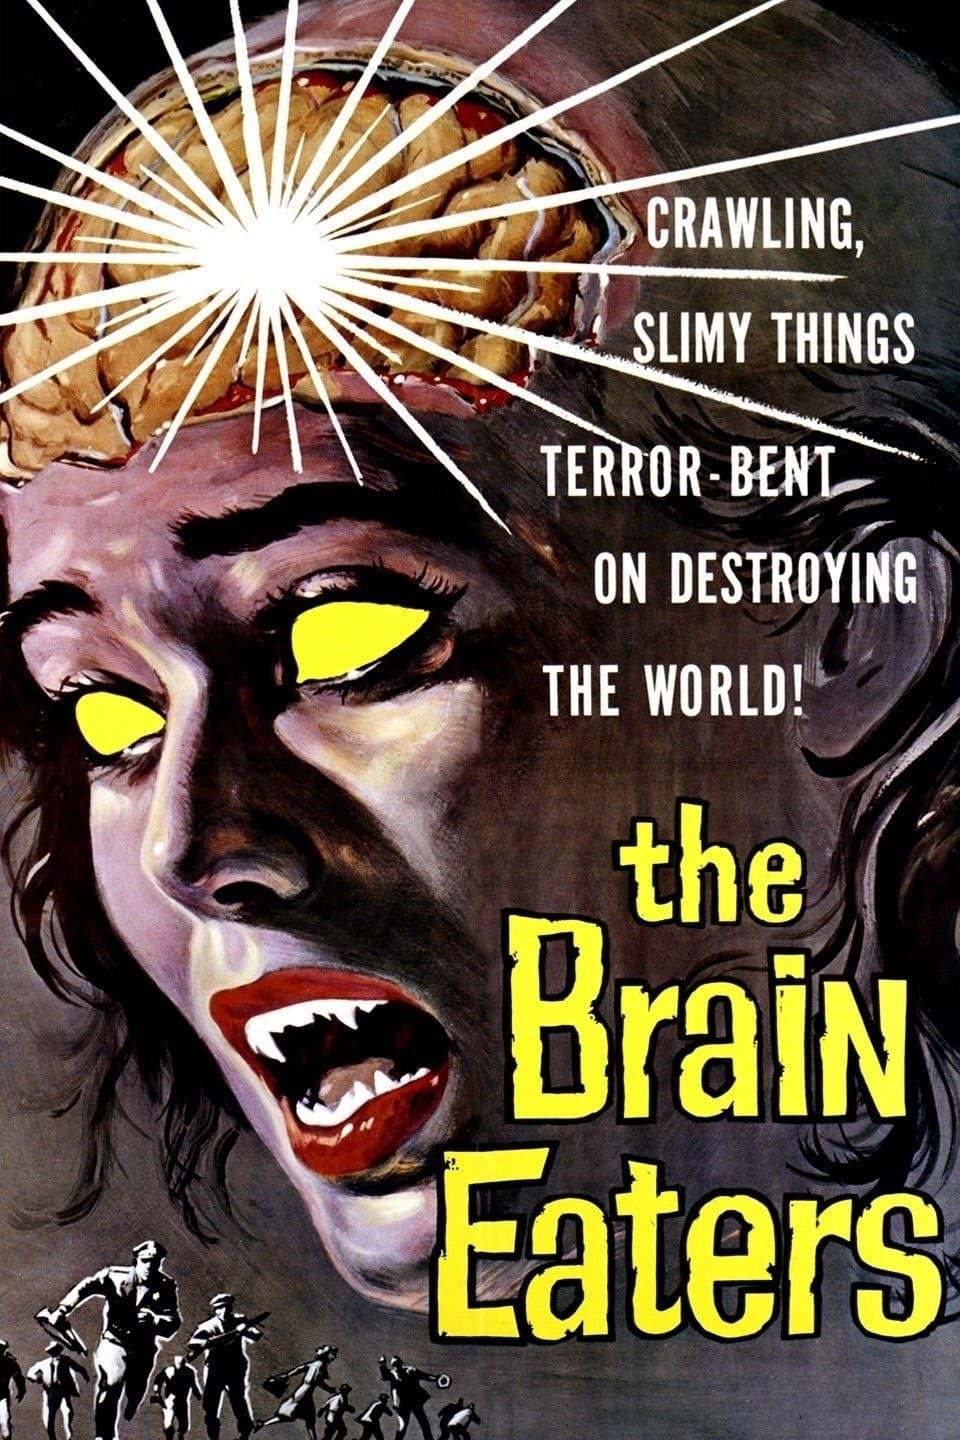 The Brain Eaters poster